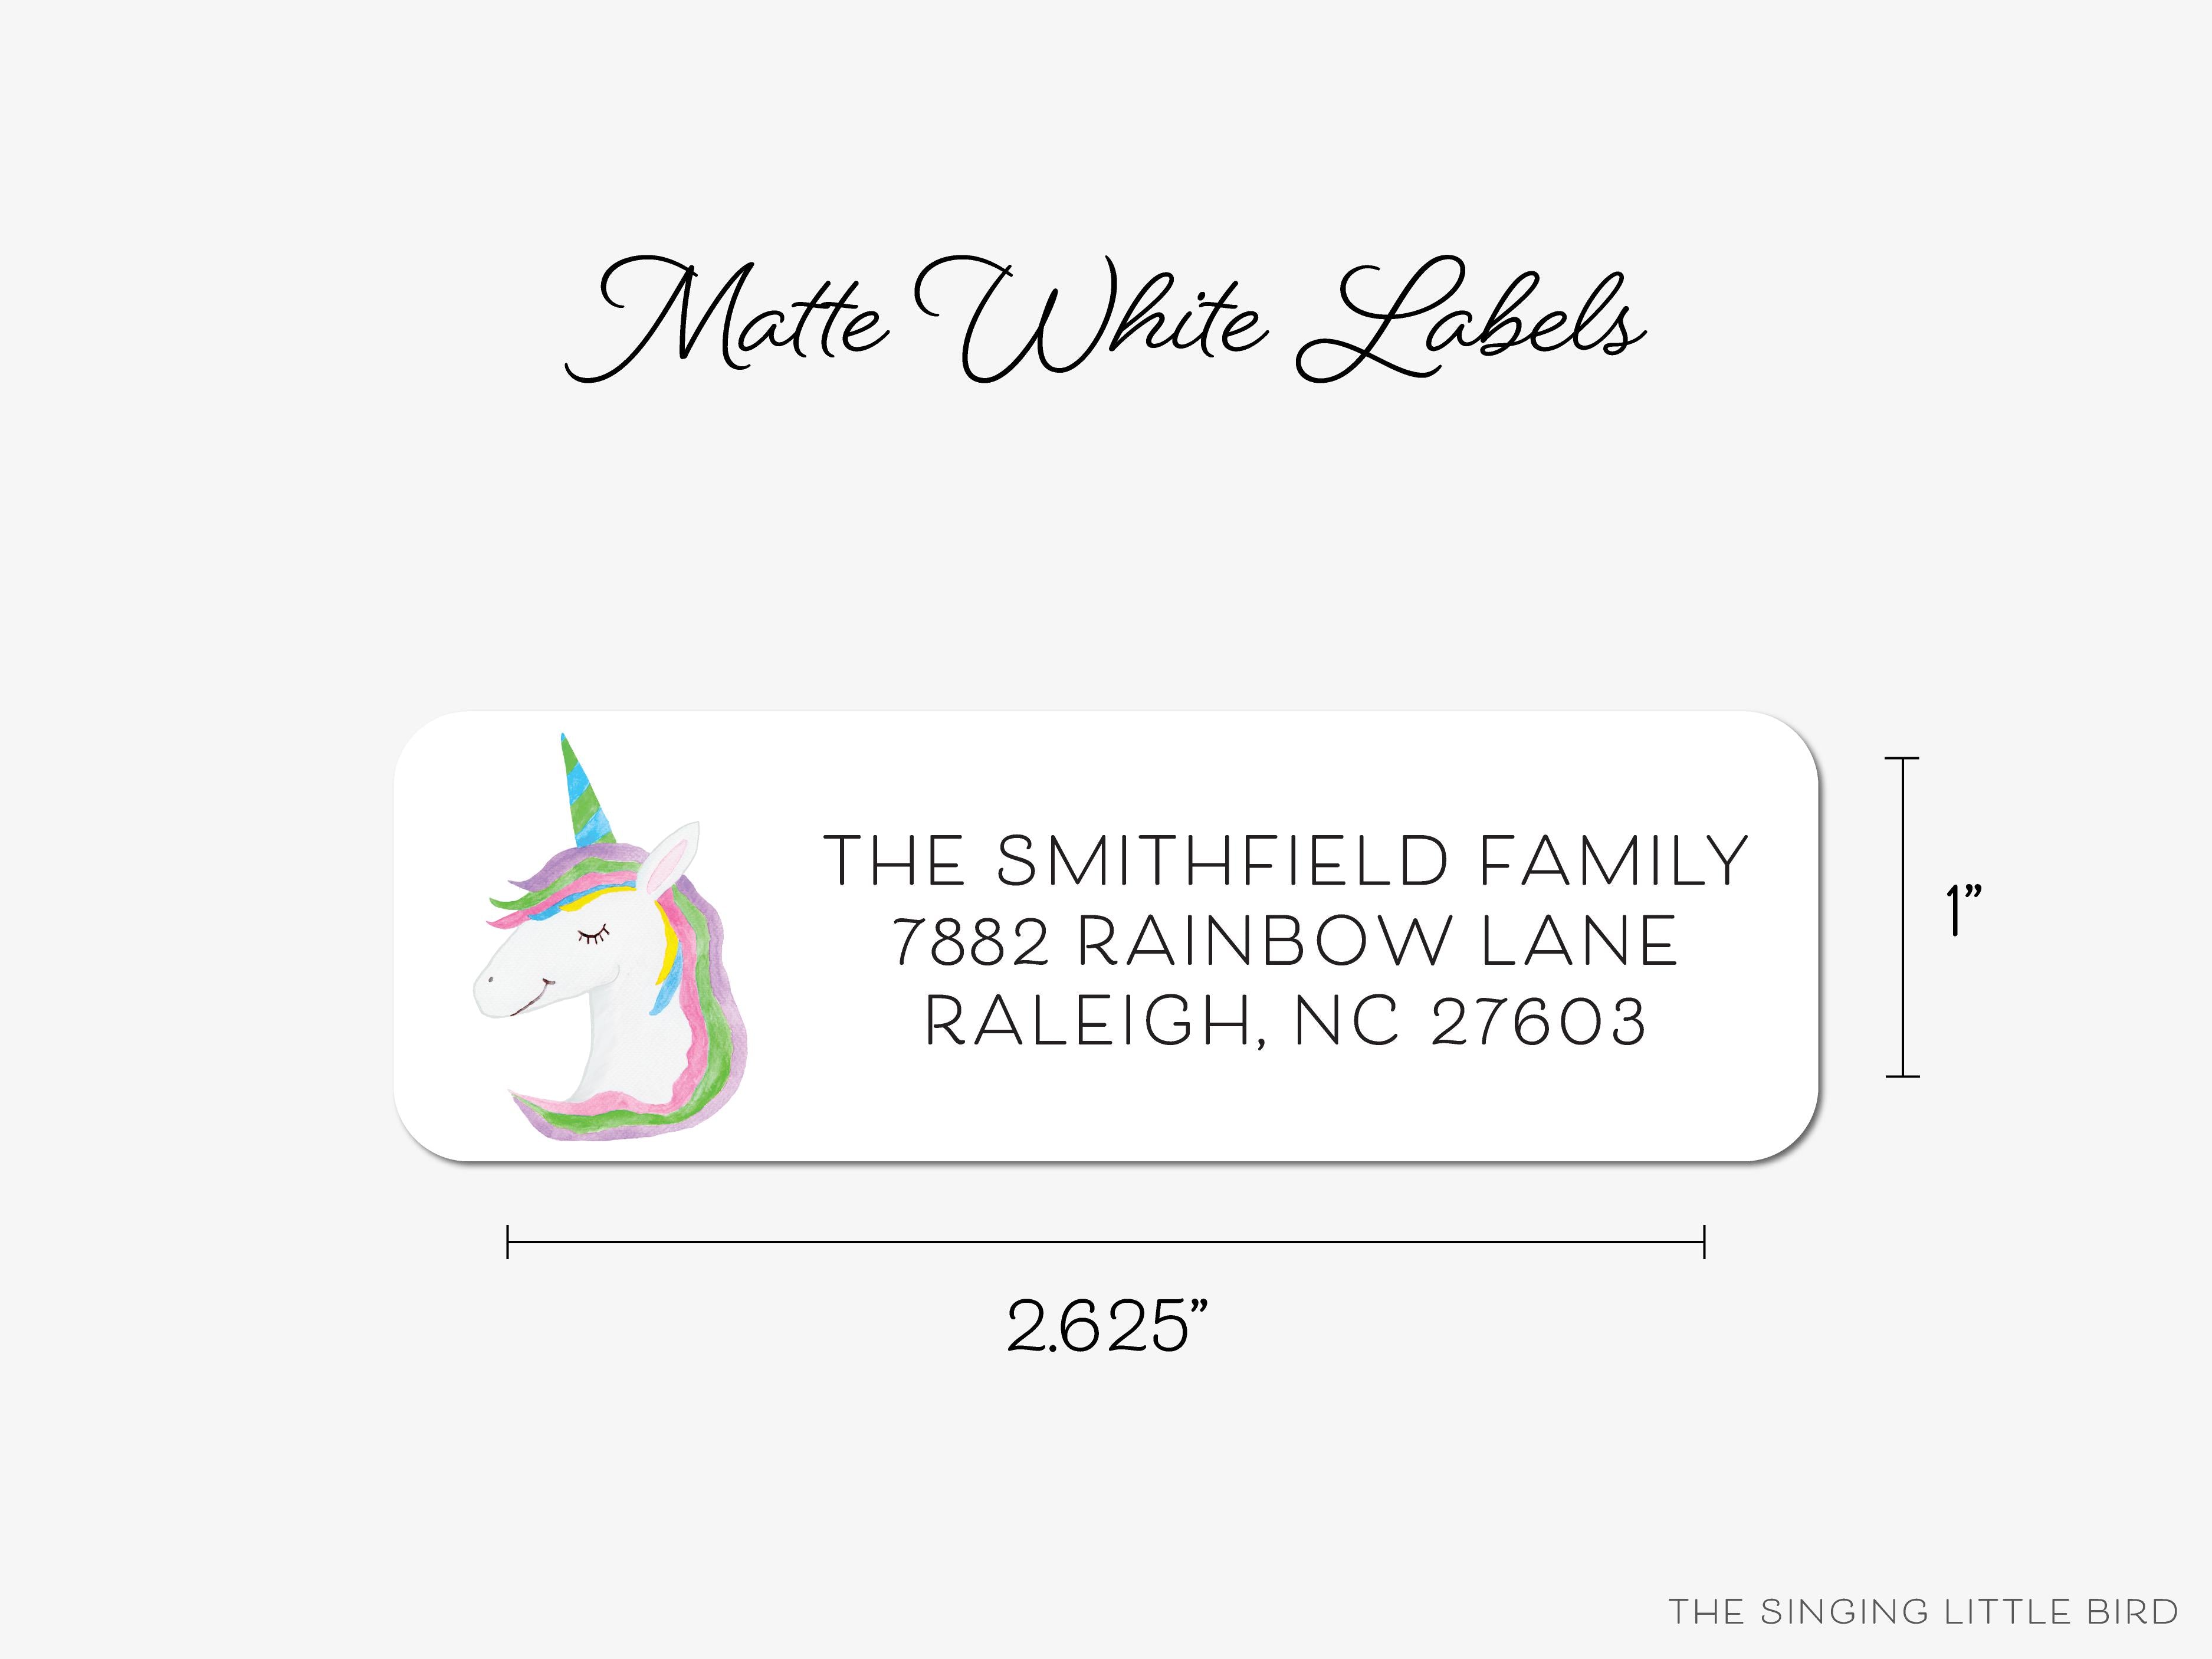 Unicorn Return Address Labels-These personalized return address labels are 2.625" x 1" and feature our hand-painted watercolor unicorn, printed in the USA on beautiful matte finish labels. These make gifts for yourself or the make-believe lover. -The Singing Little Bird